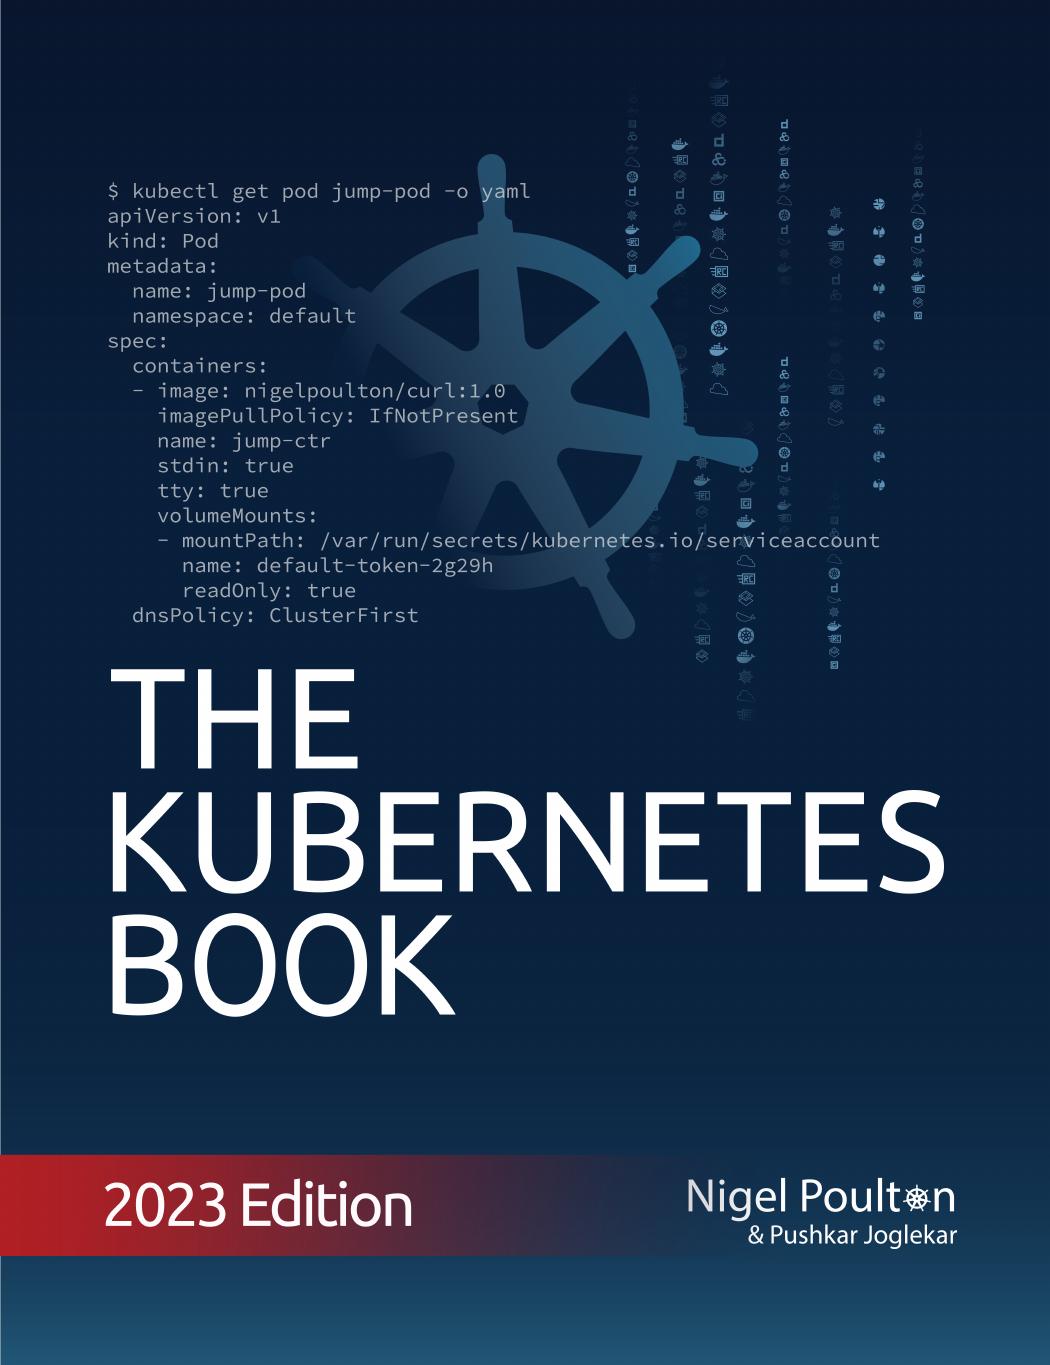 The Kubernetes Book - 2023 Edition